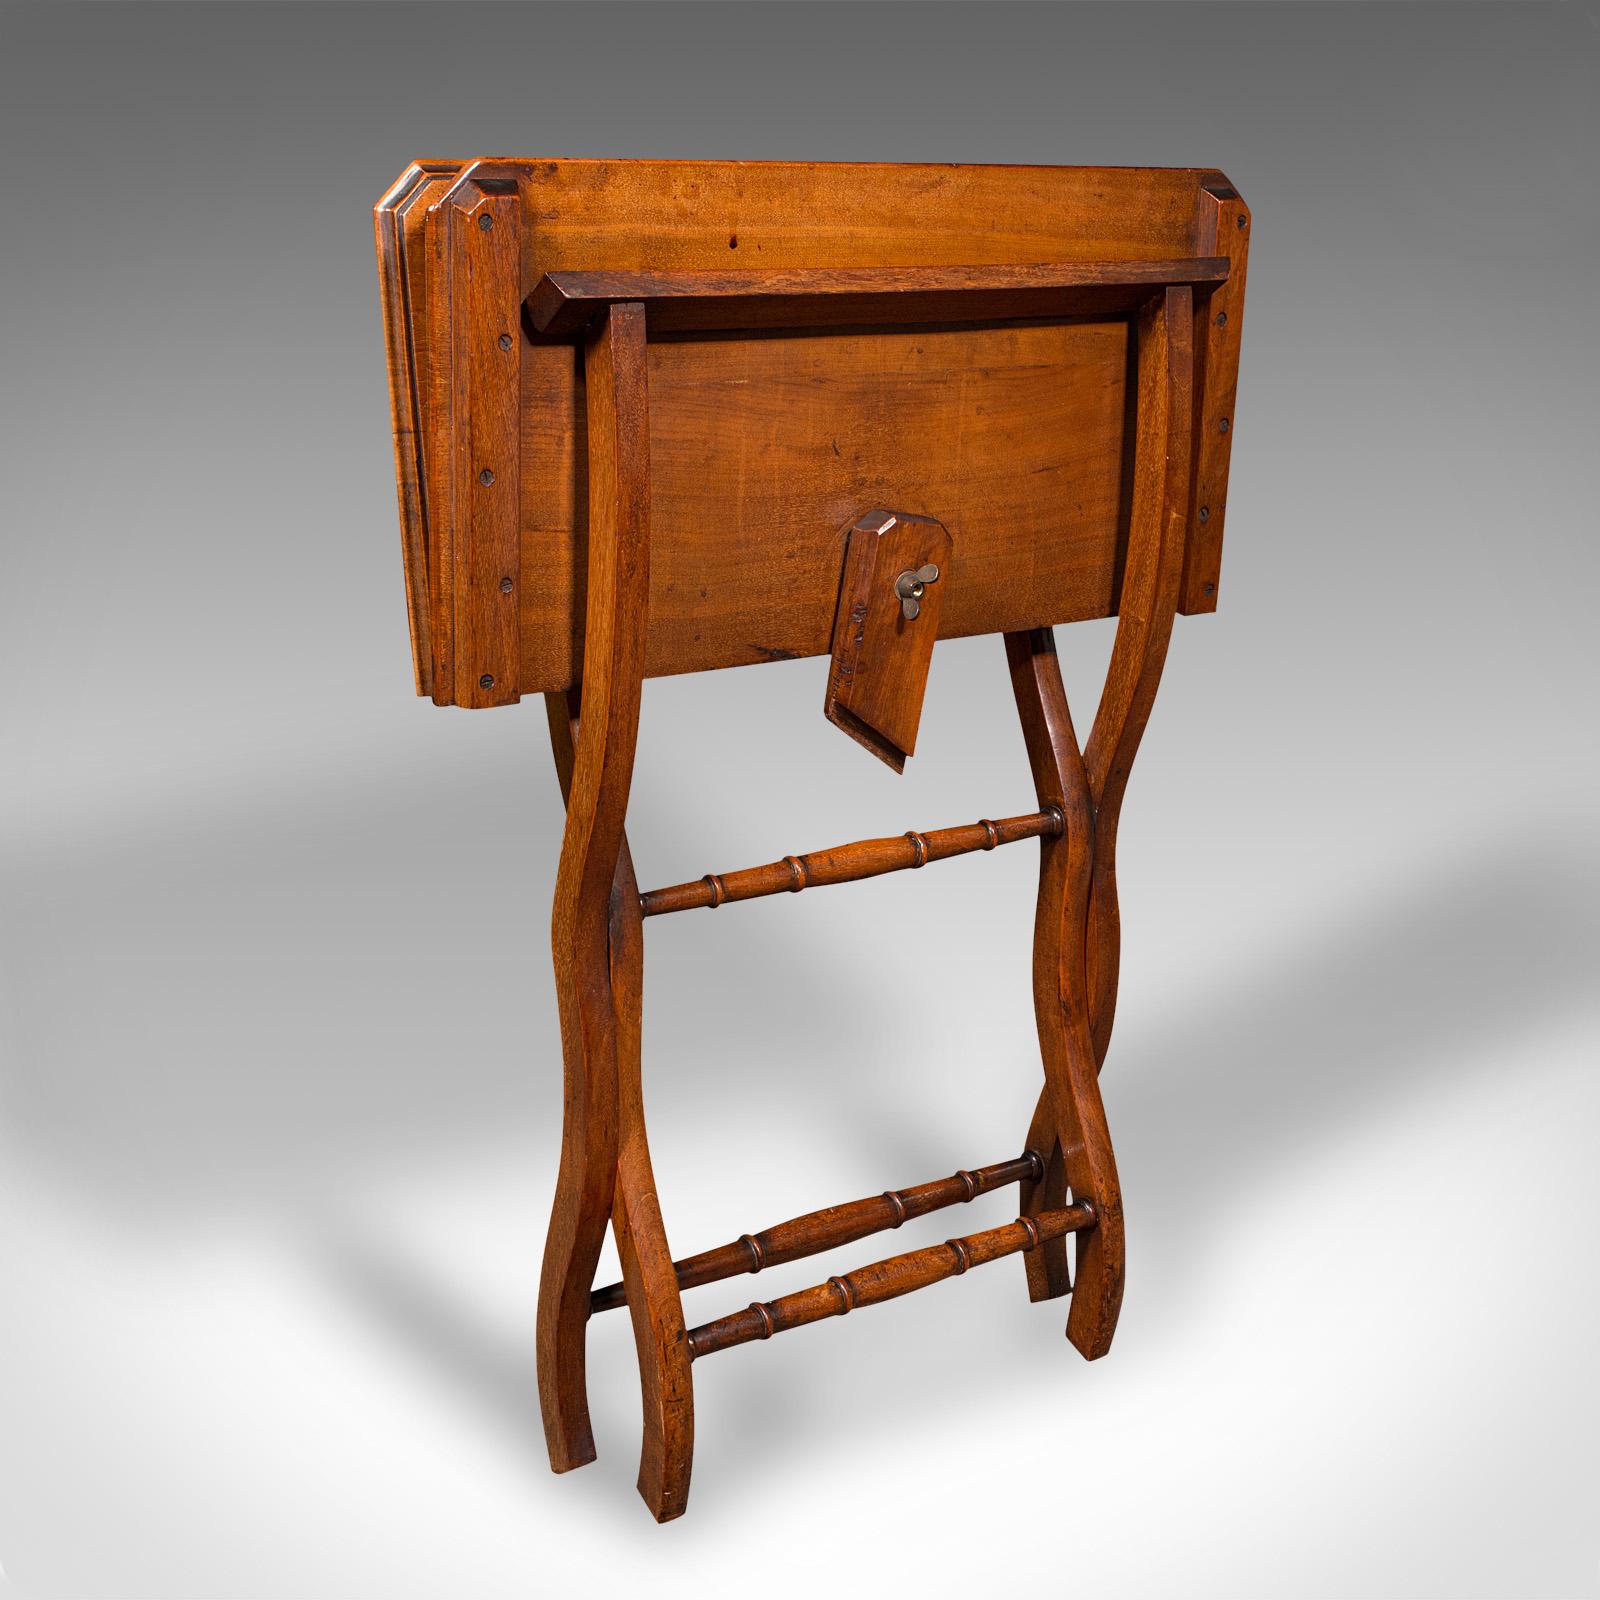 This is an antique folding writing table. An English, walnut carriage, side or serving table, dating to the Victorian period, circa 1880.

Graceful and interesting, with wonderful versatility for any room
Displays a desirable aged patina and in